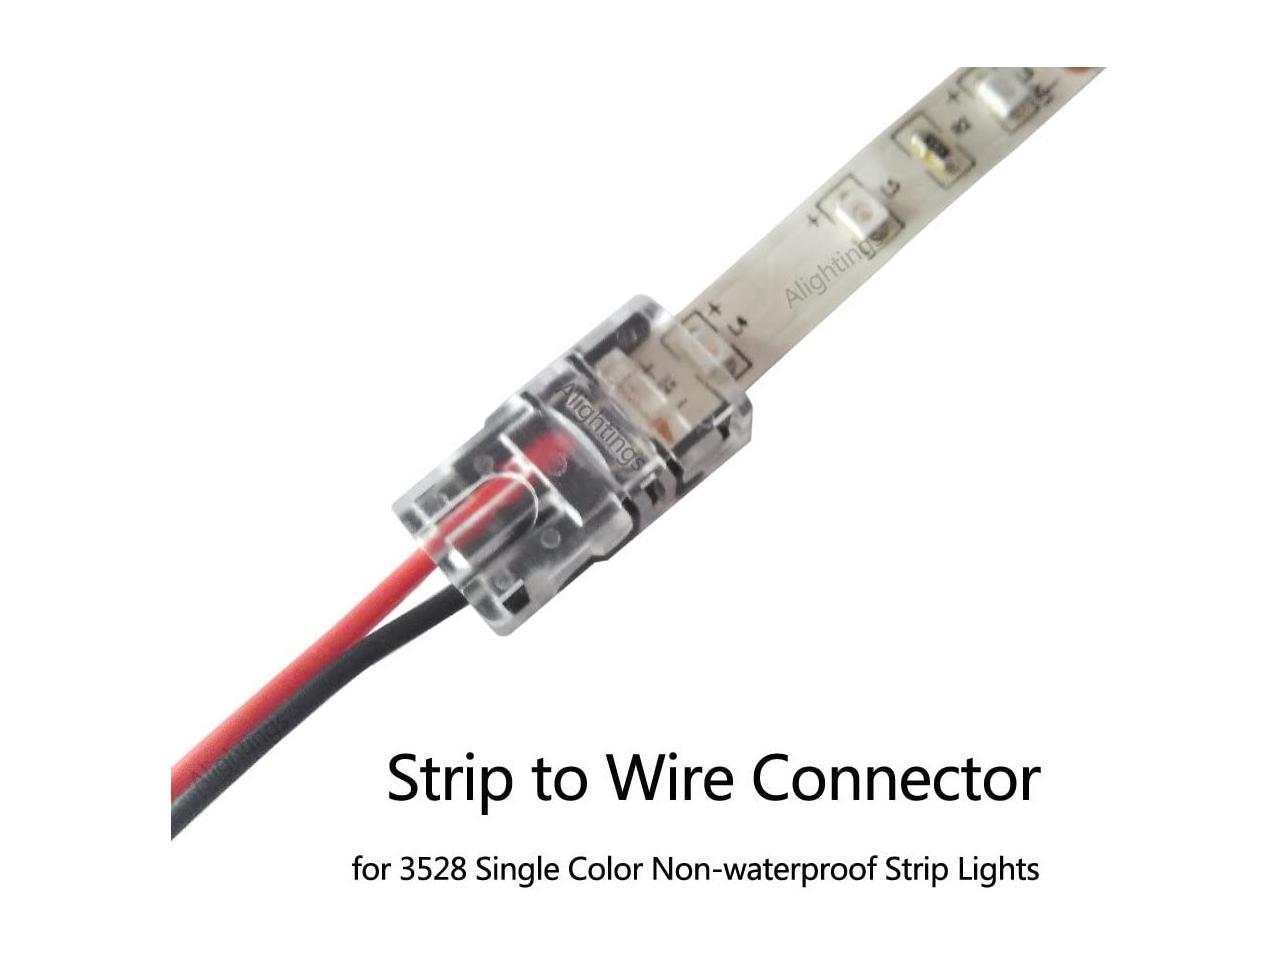 2835 3528 2 Pin 8mm LED Strip Connector - DIY Strip to Wire Quick  Connection for 12v 24v Single Color Led Strip Lights (Pack of 10) -  Newegg.com